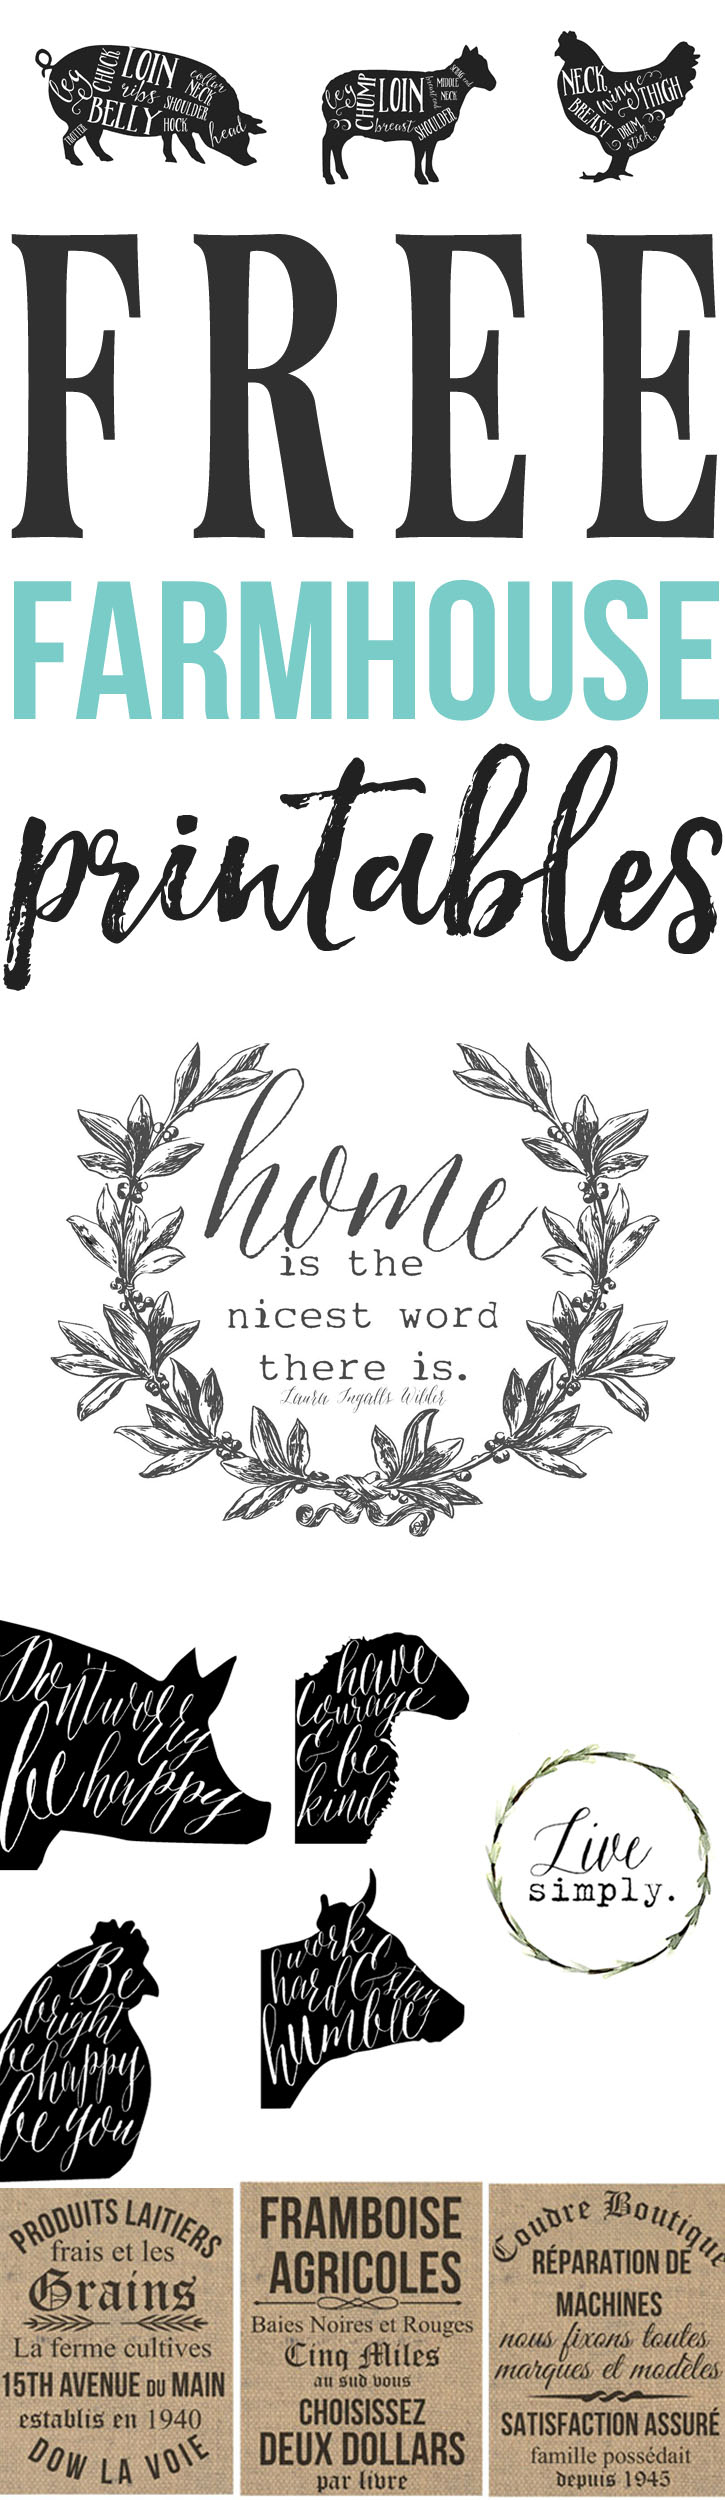 Free Farmhouse Printables For Your Home - The Mountain View Cottage - Free Printable Sud